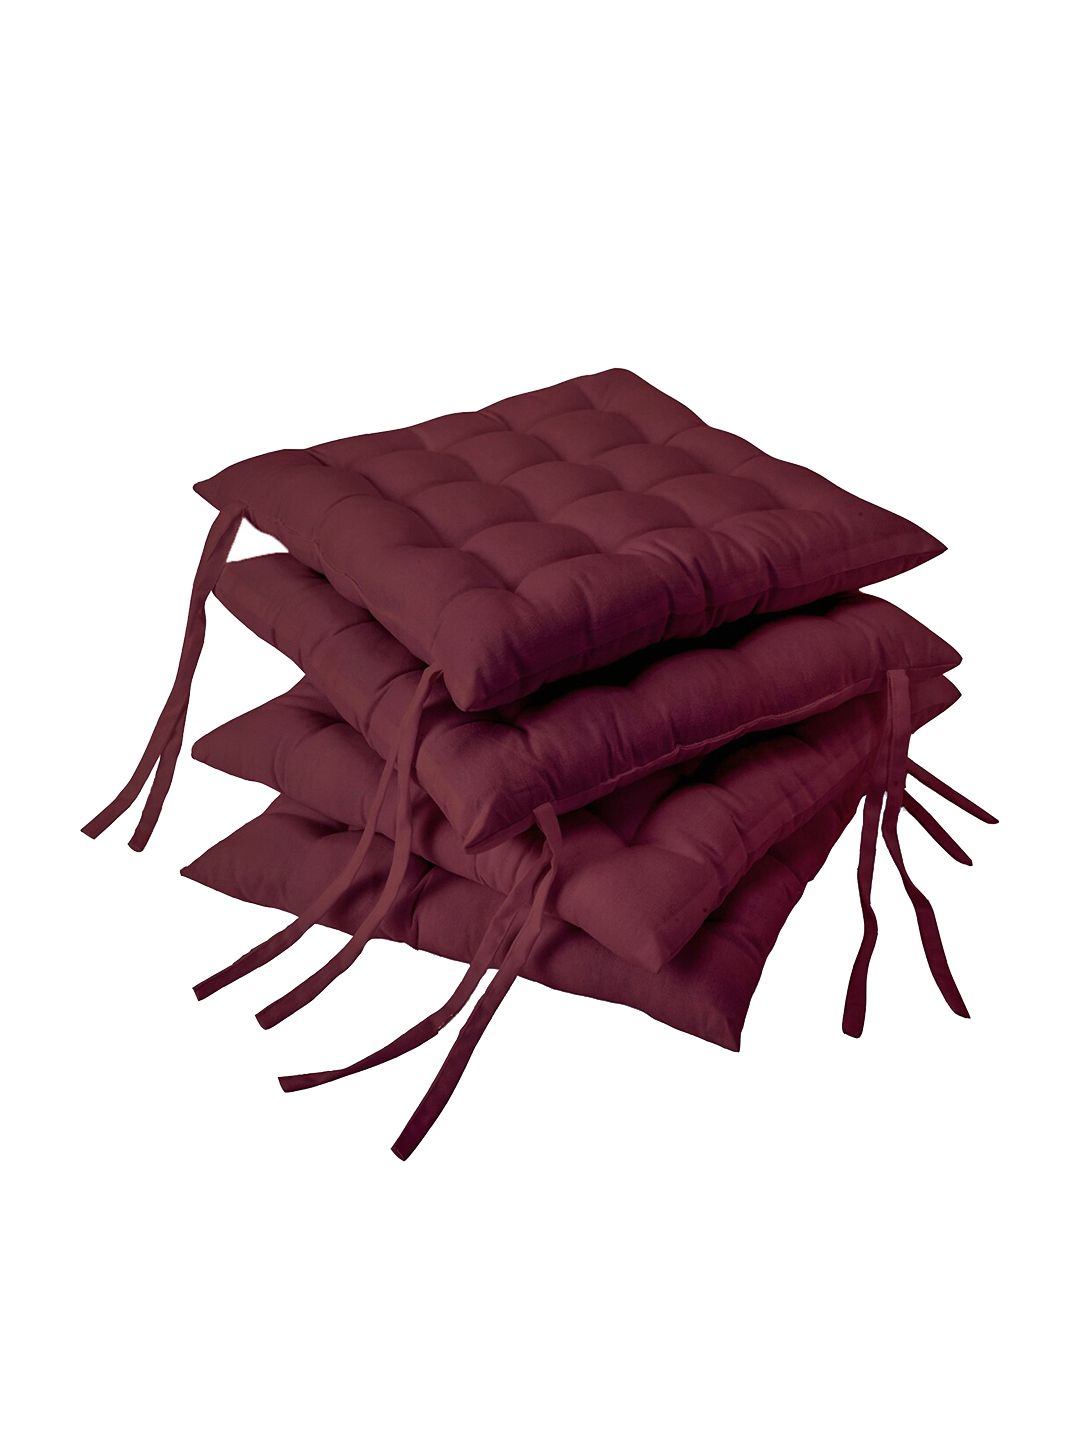 Encasa Homes Set of 4 Maroon Cotton Chair Pads Price in India